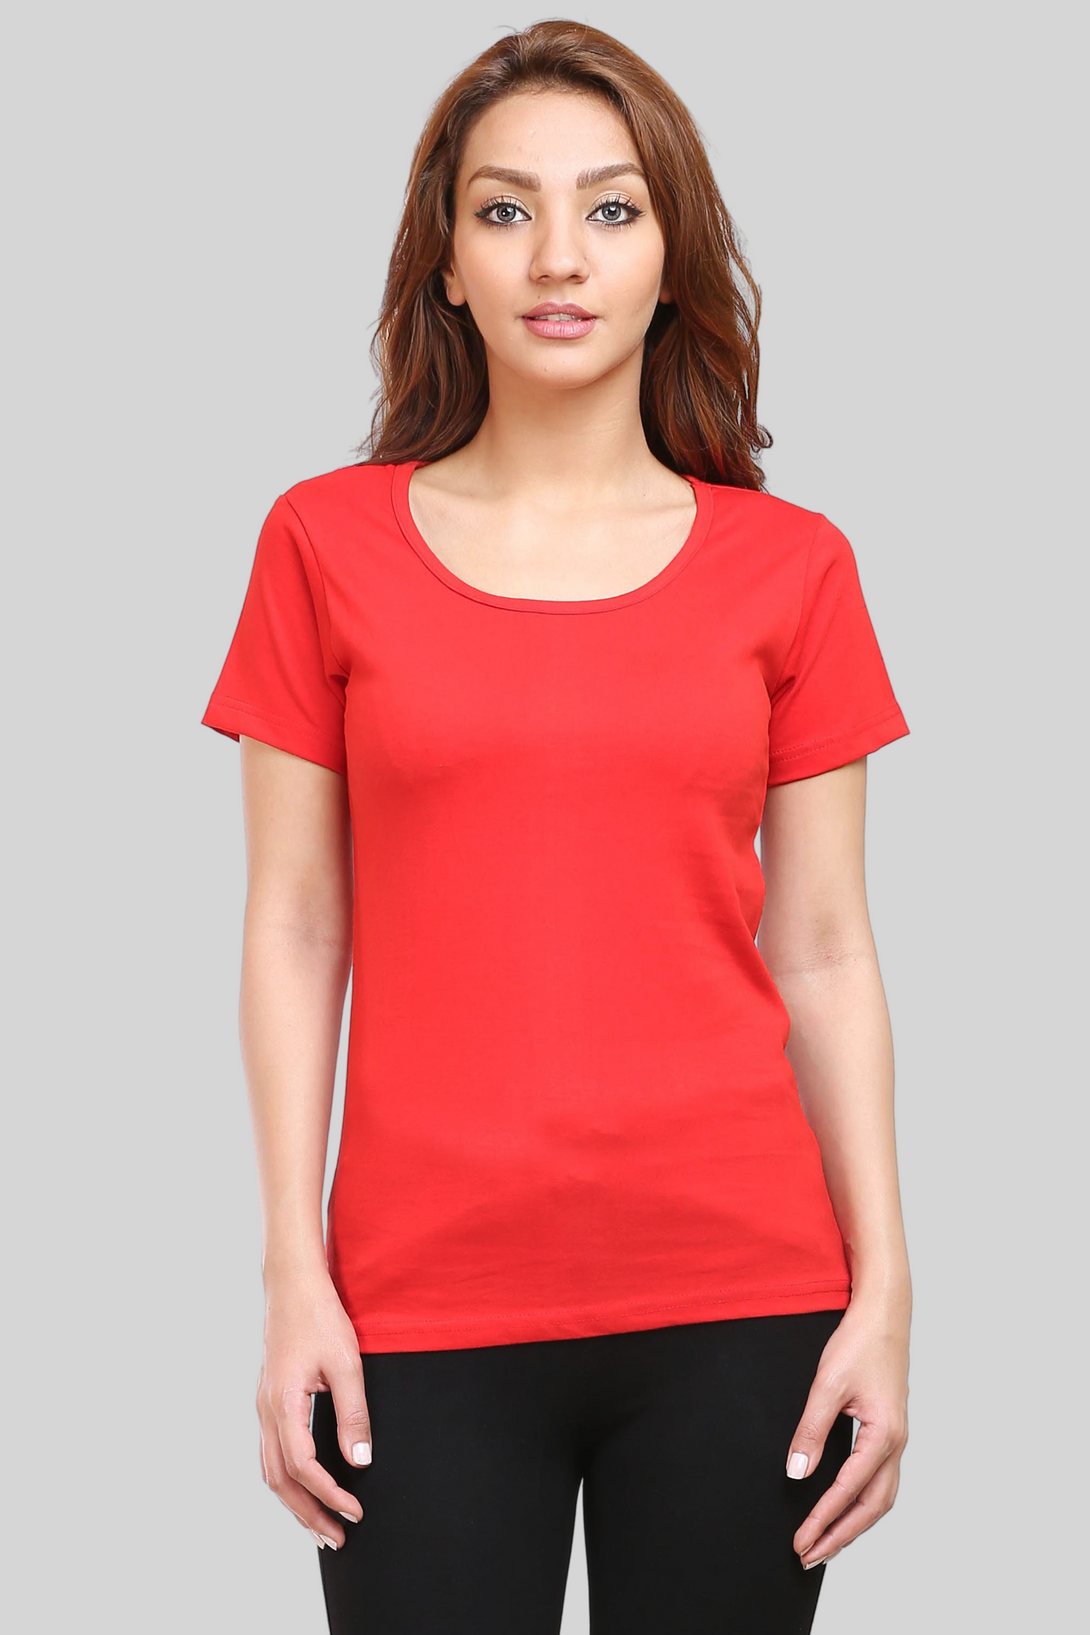 Red Scoop Neck T-Shirt For Women - WowWaves - 3